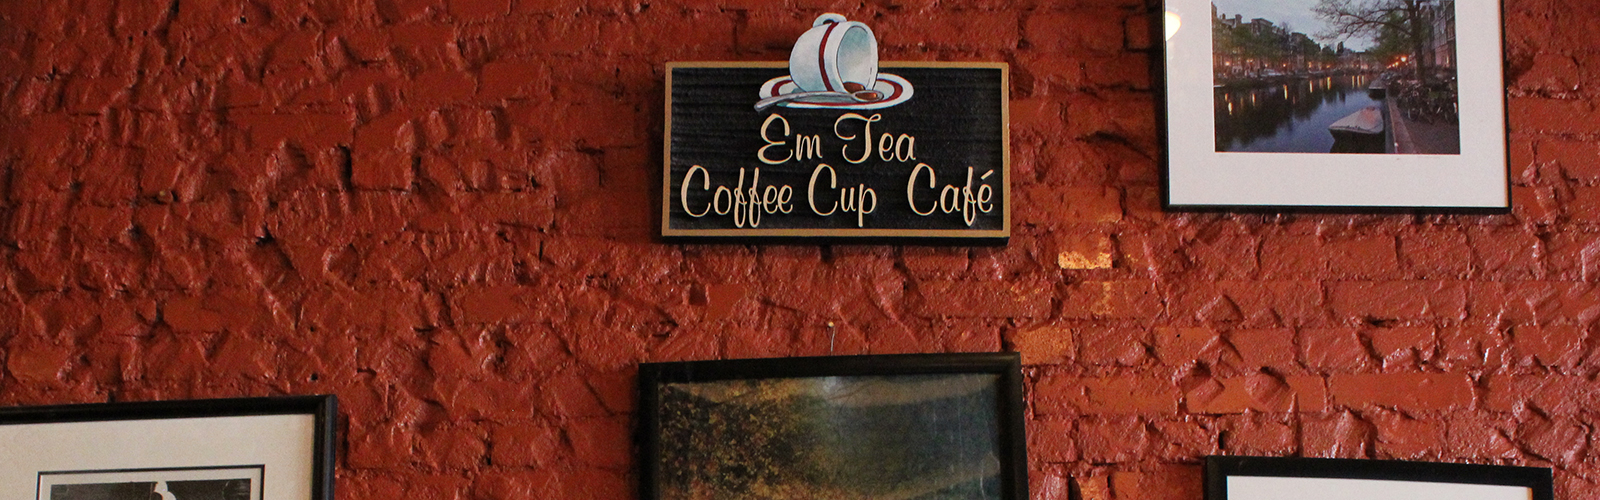 EmTea Coffee Cup Café is a quaint and inviting place for the community.